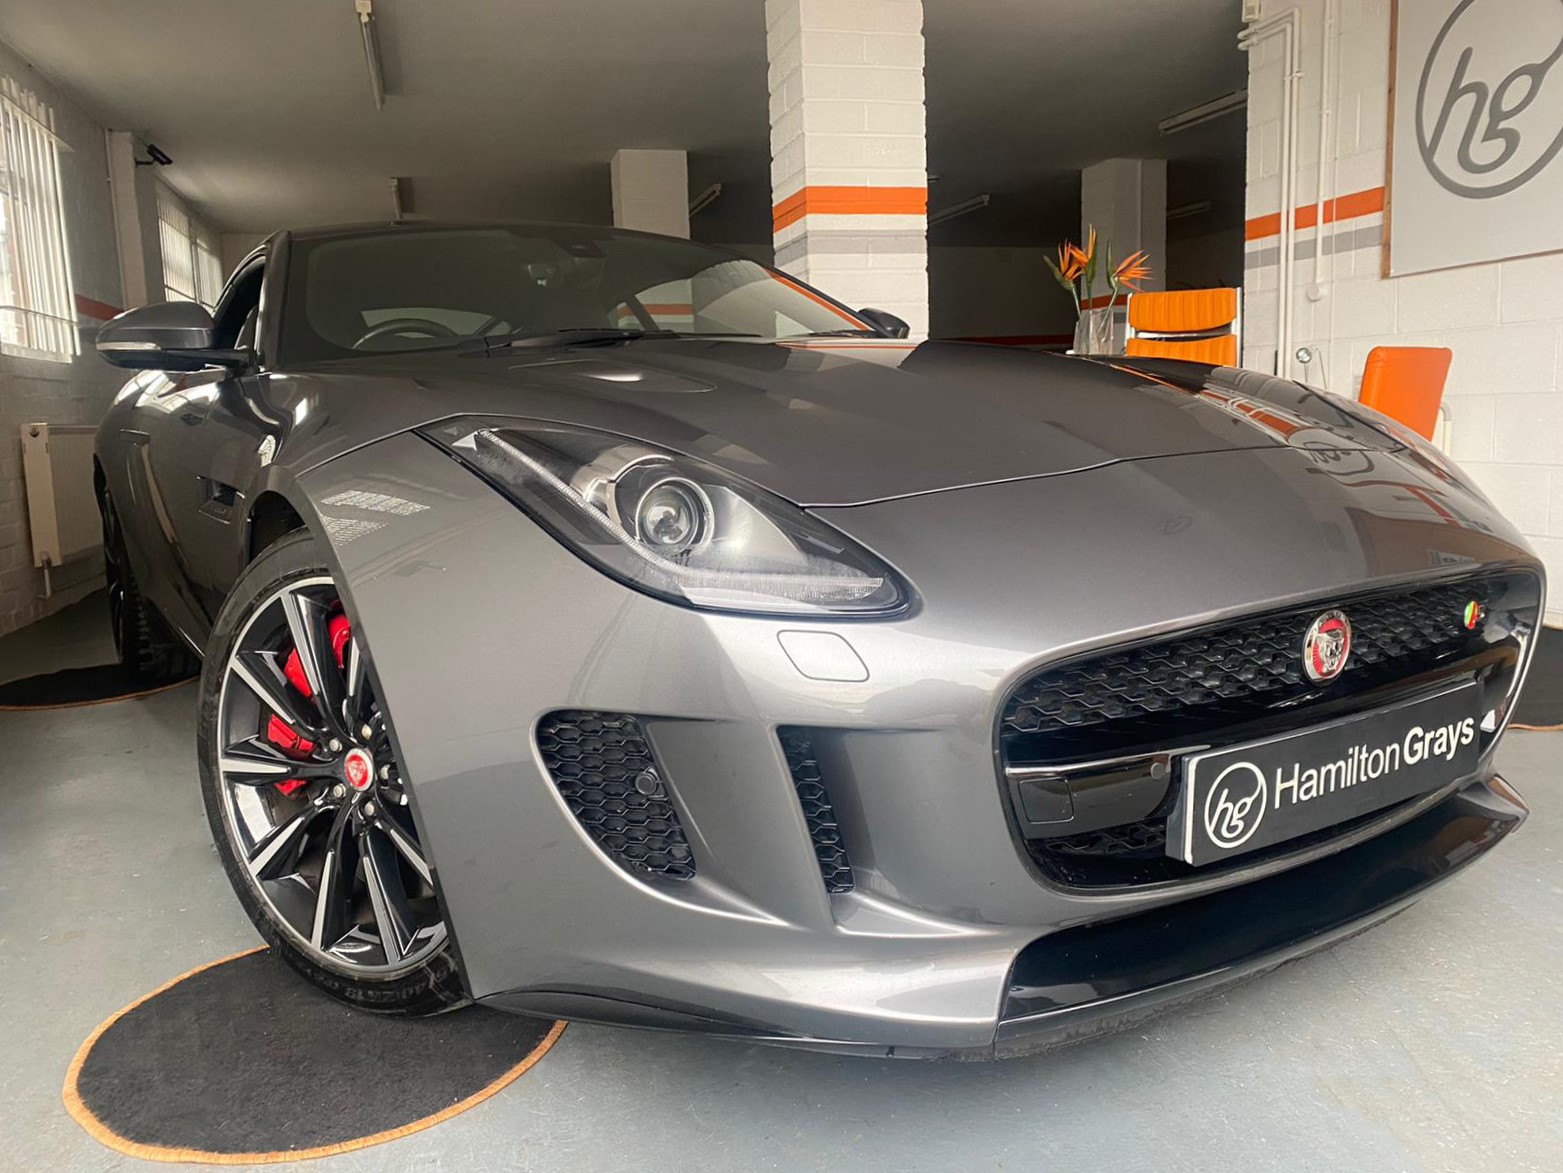 2015 (15) Jaguar F Type 3.0 V6 S [375] QS AWD. In Corris Grey Metallic with Full Black Leather Interior. Just 23k.. FJSH. Top Spec’..  (SOLD)